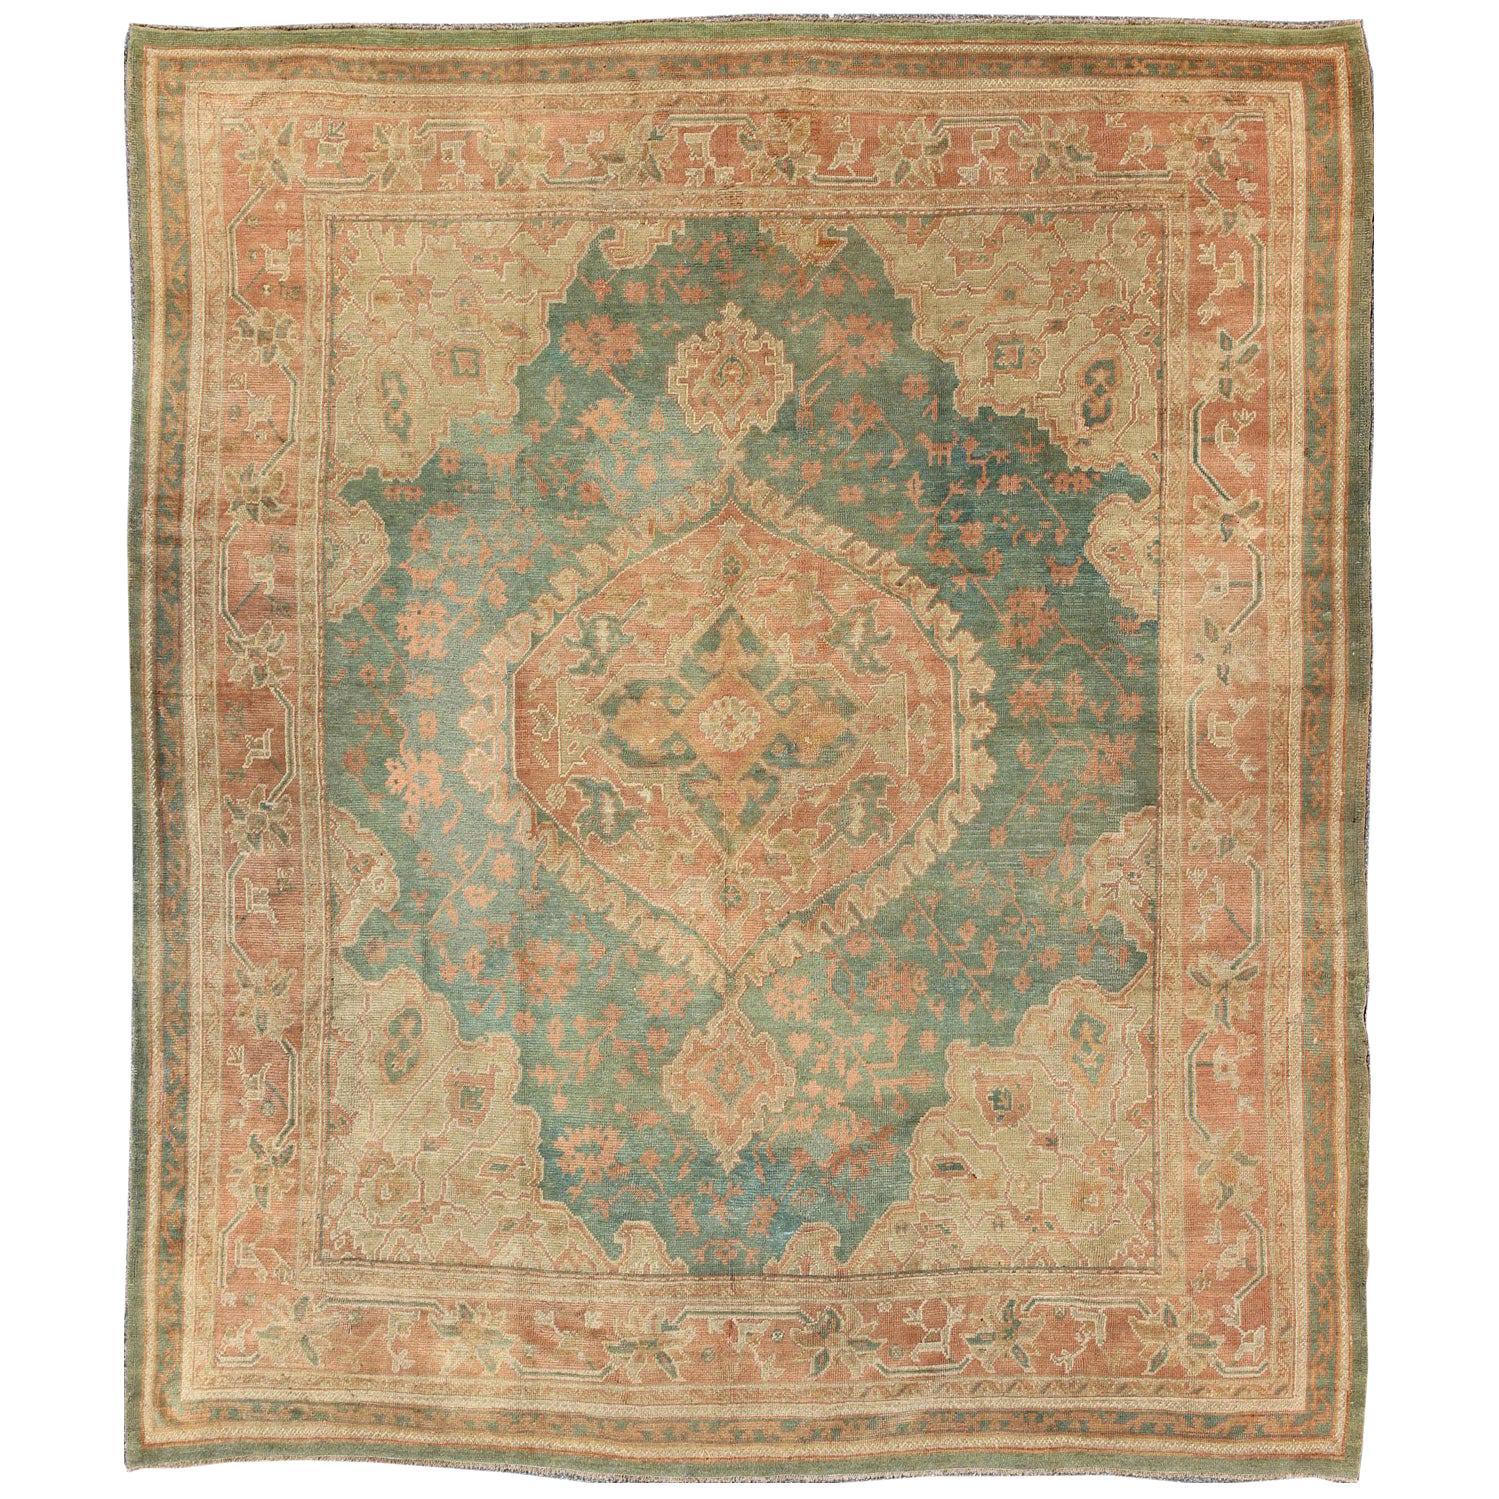 Antique Turkish Medallion Oushak Rug in Teal Green, Rose and Buttery Colors